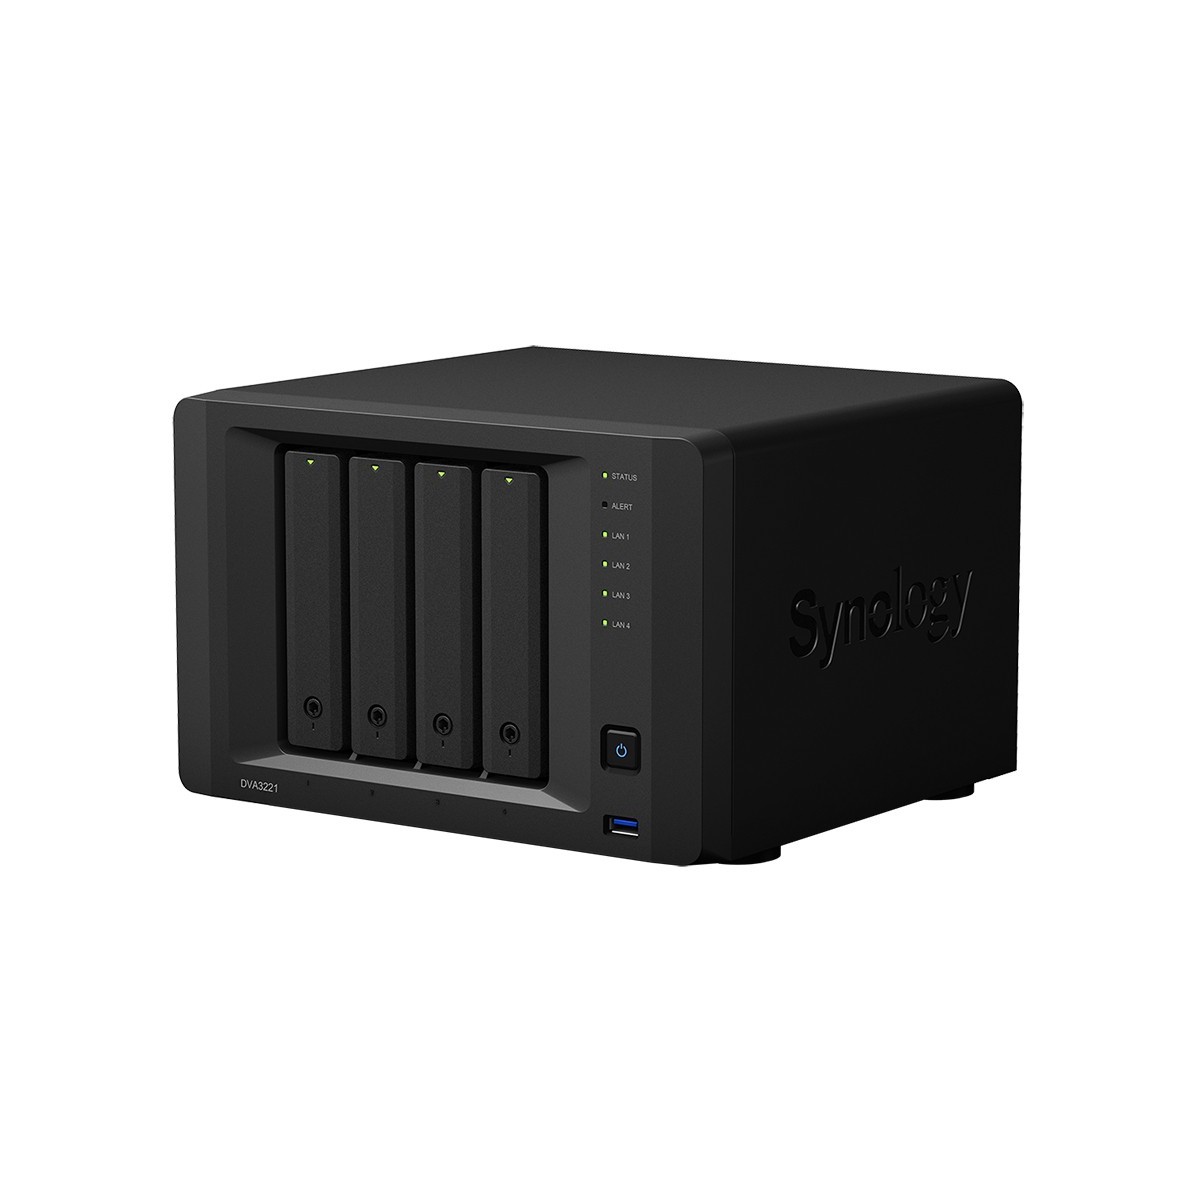 Synology DVA3221 - 32 channels - 8000 MB - DDR4 - 2048 user(s) - H.264,H.265,MPEG4 - Multi